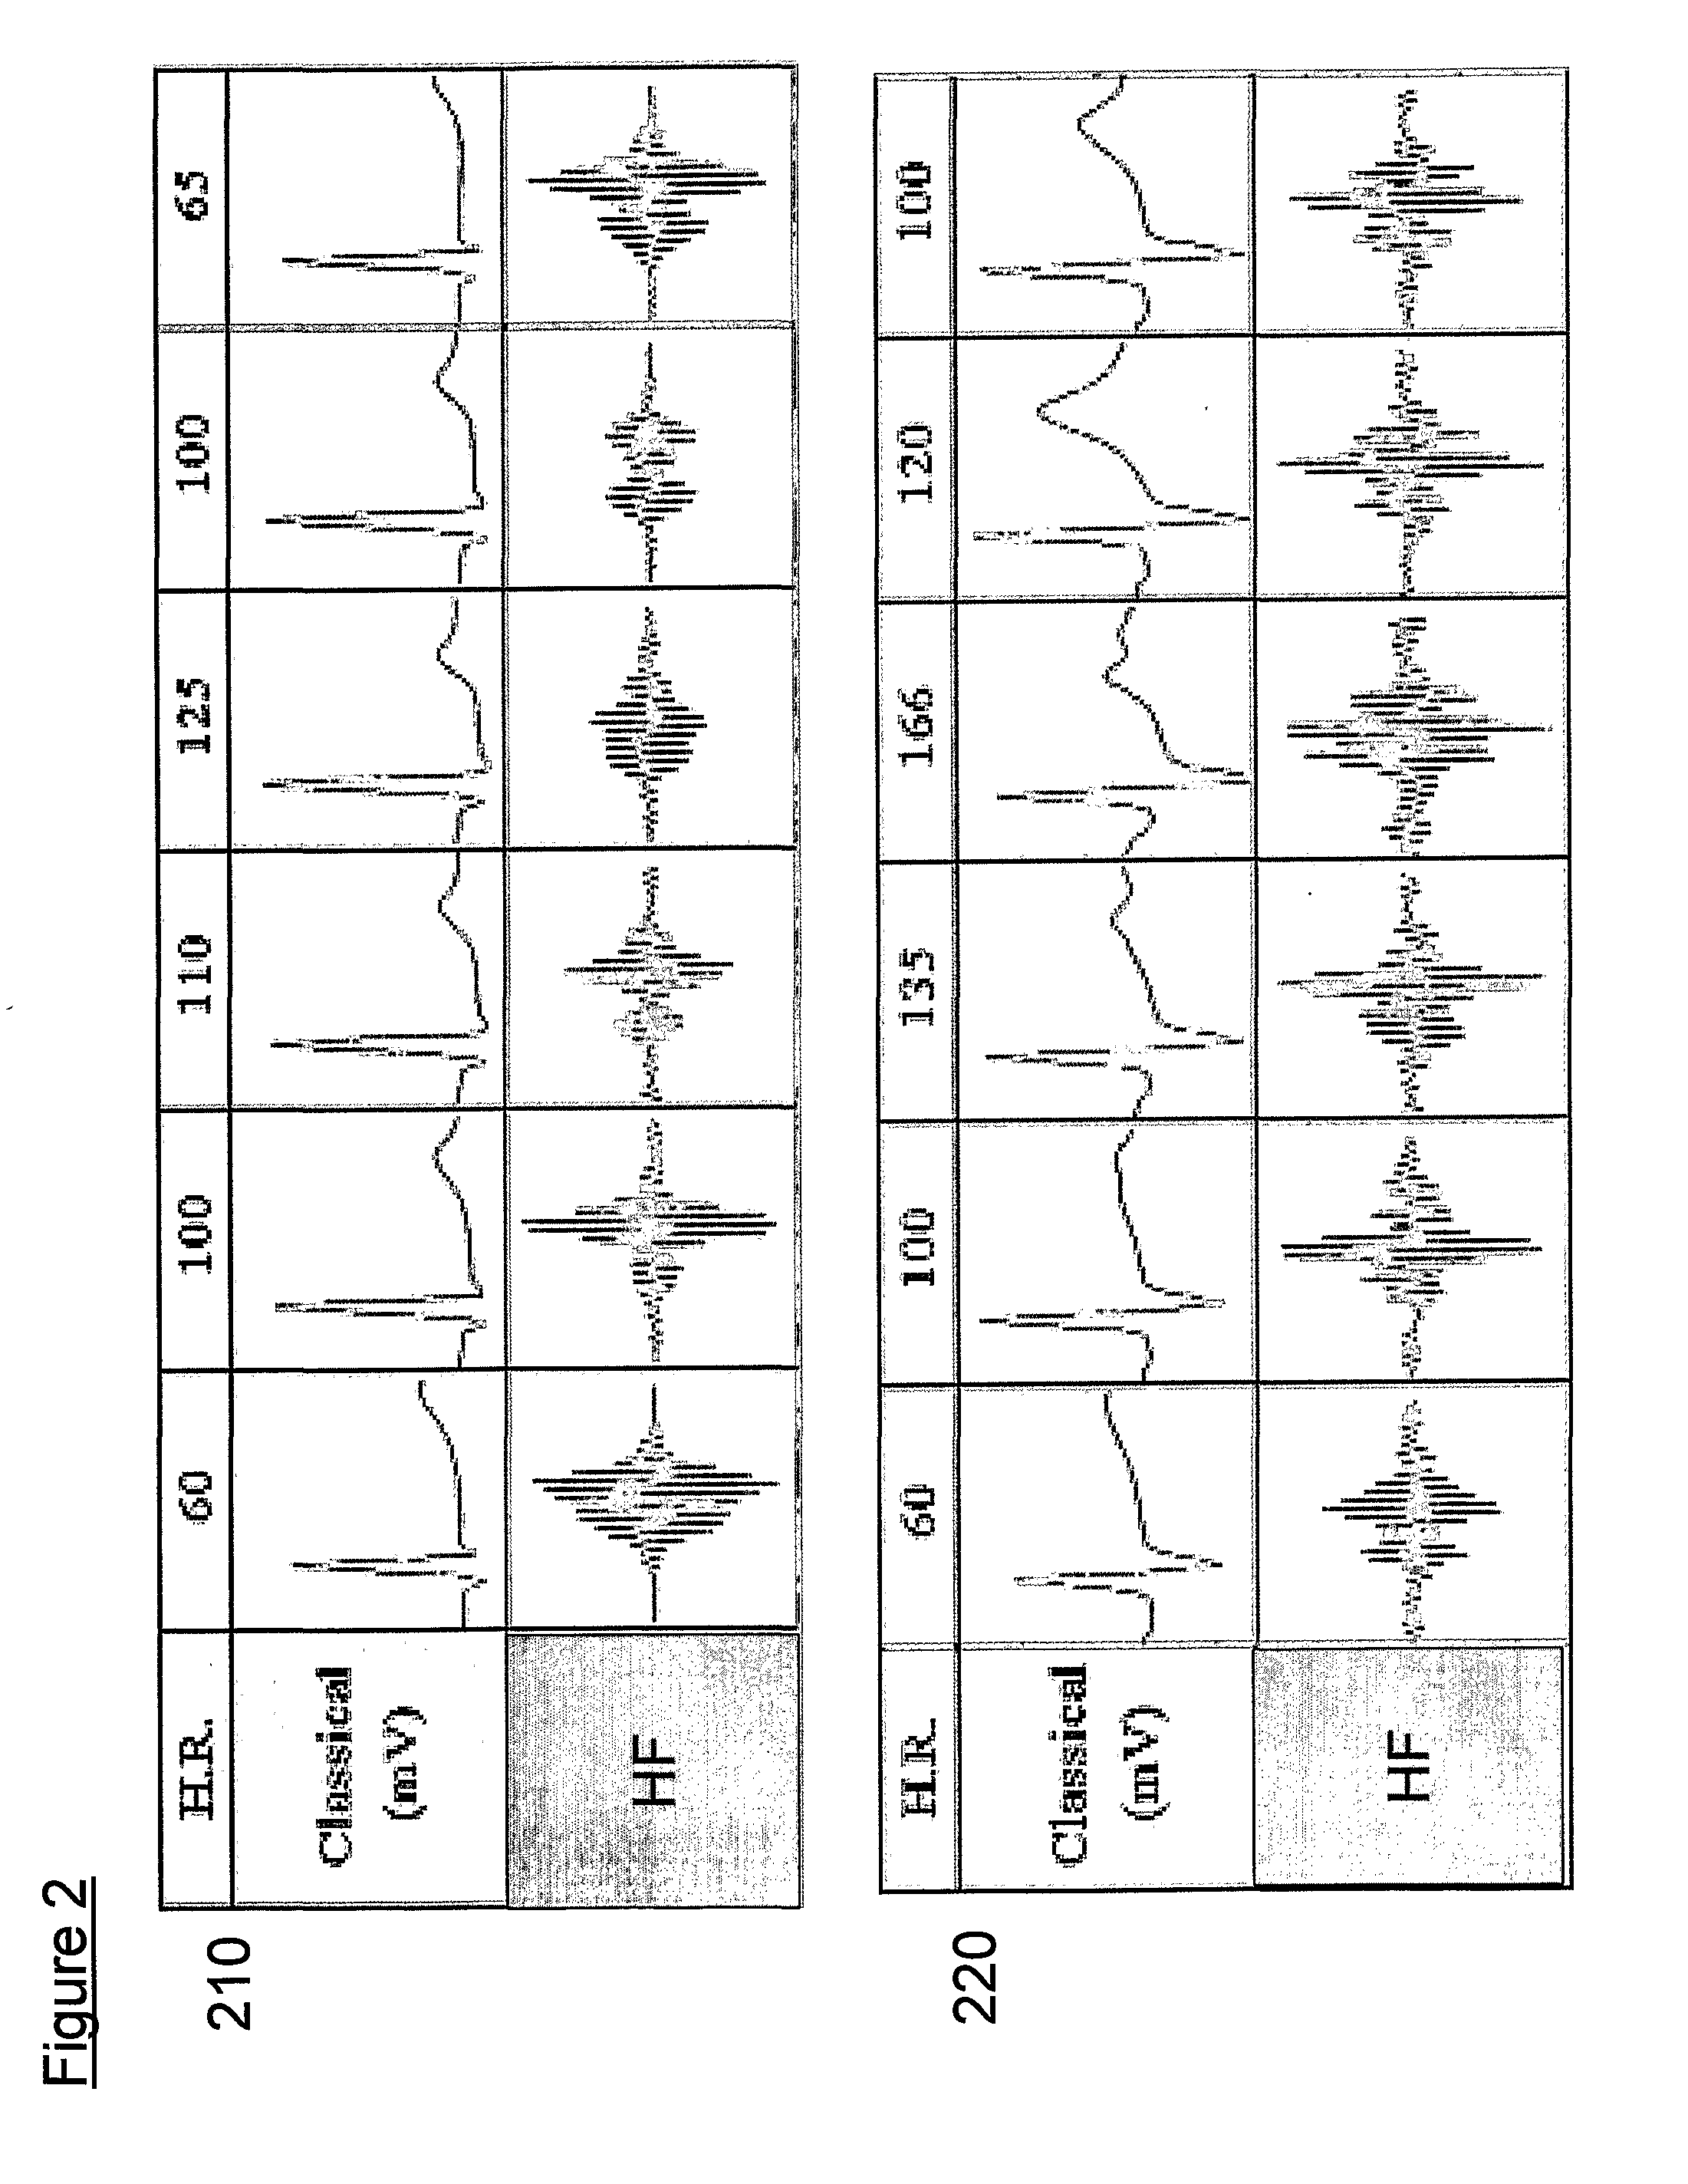 Apparatus and Method for Analysis of High Frequency Qrs Complexes